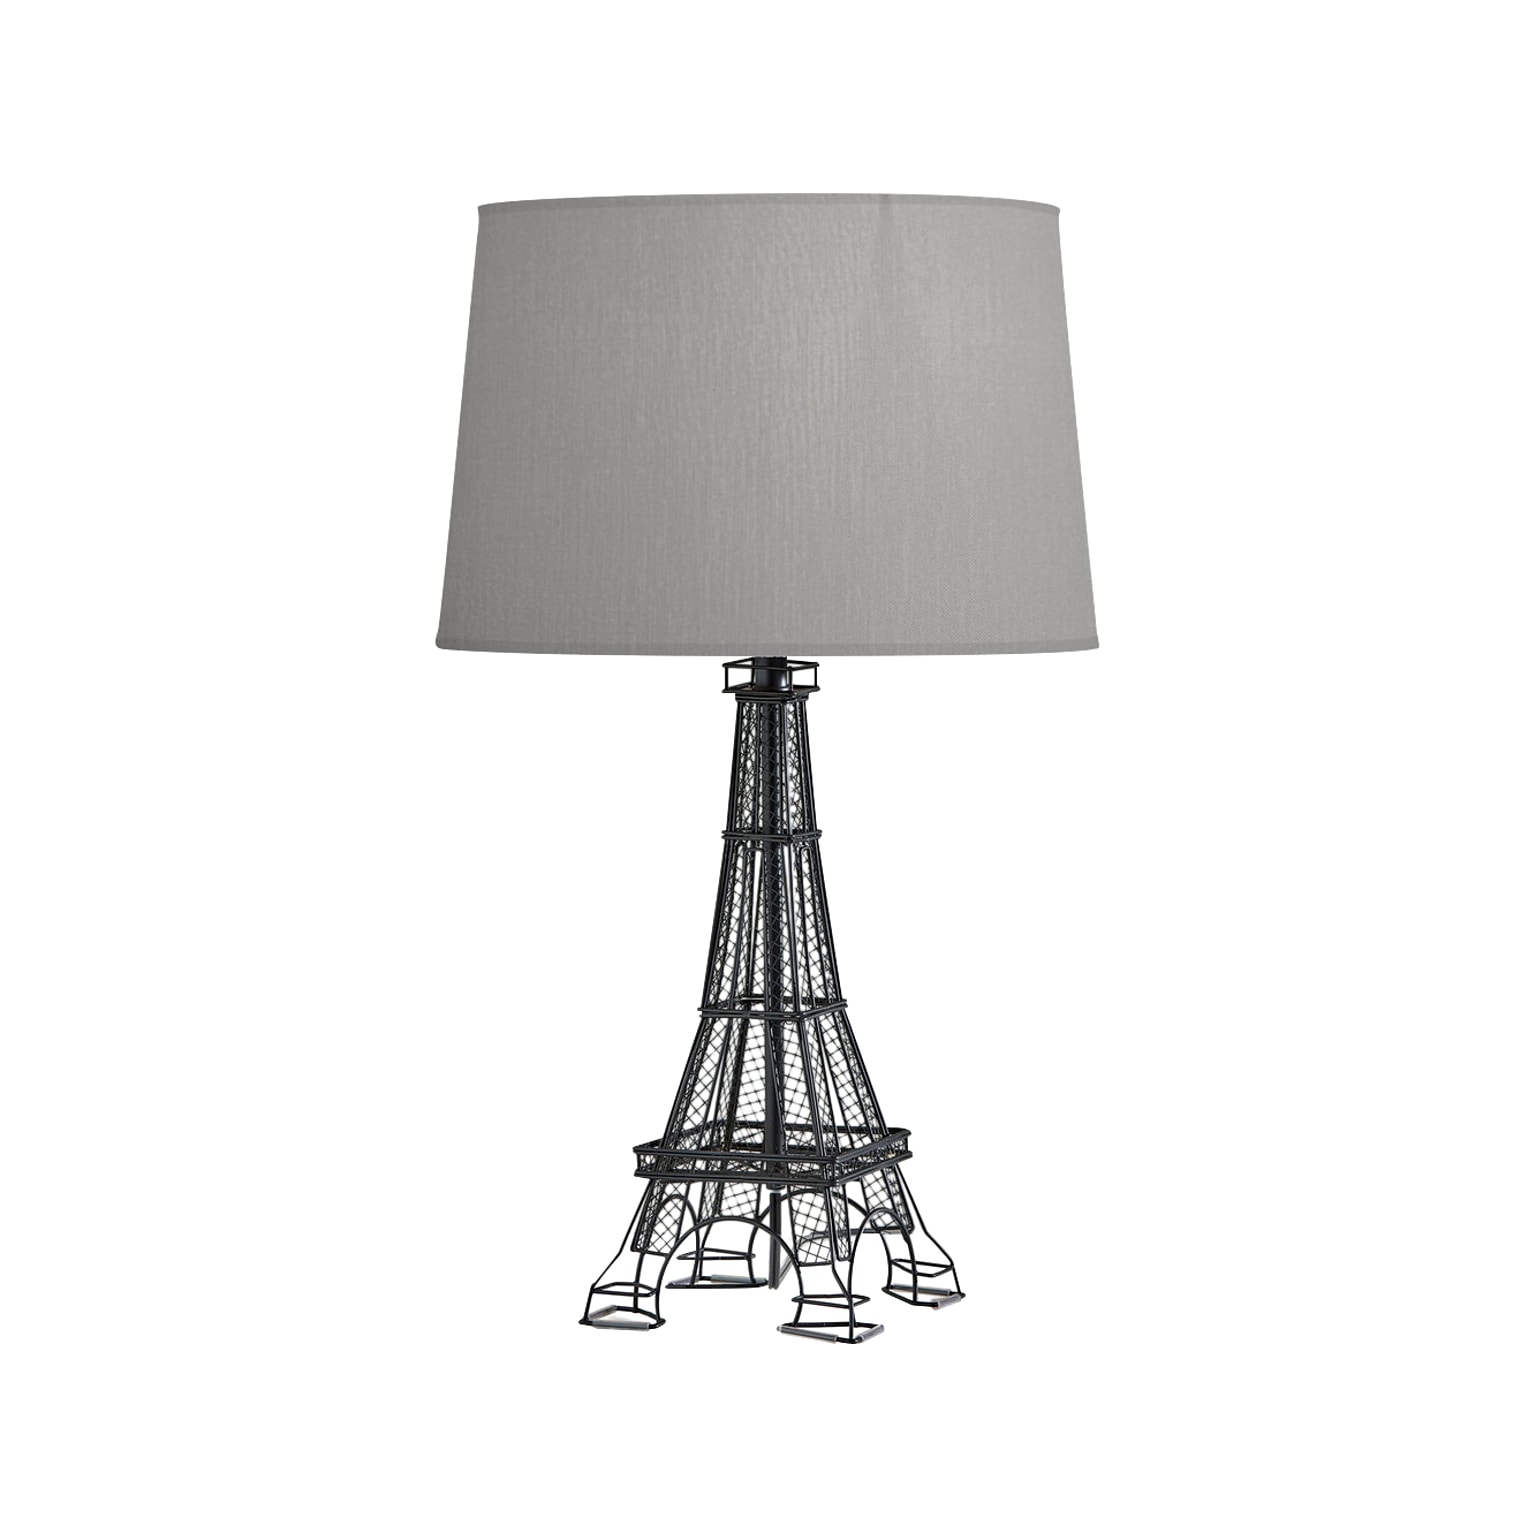 Simplee Adesso Eiffel Tower Incandescent Table Lamp, Black/Gray (SL5001-03)